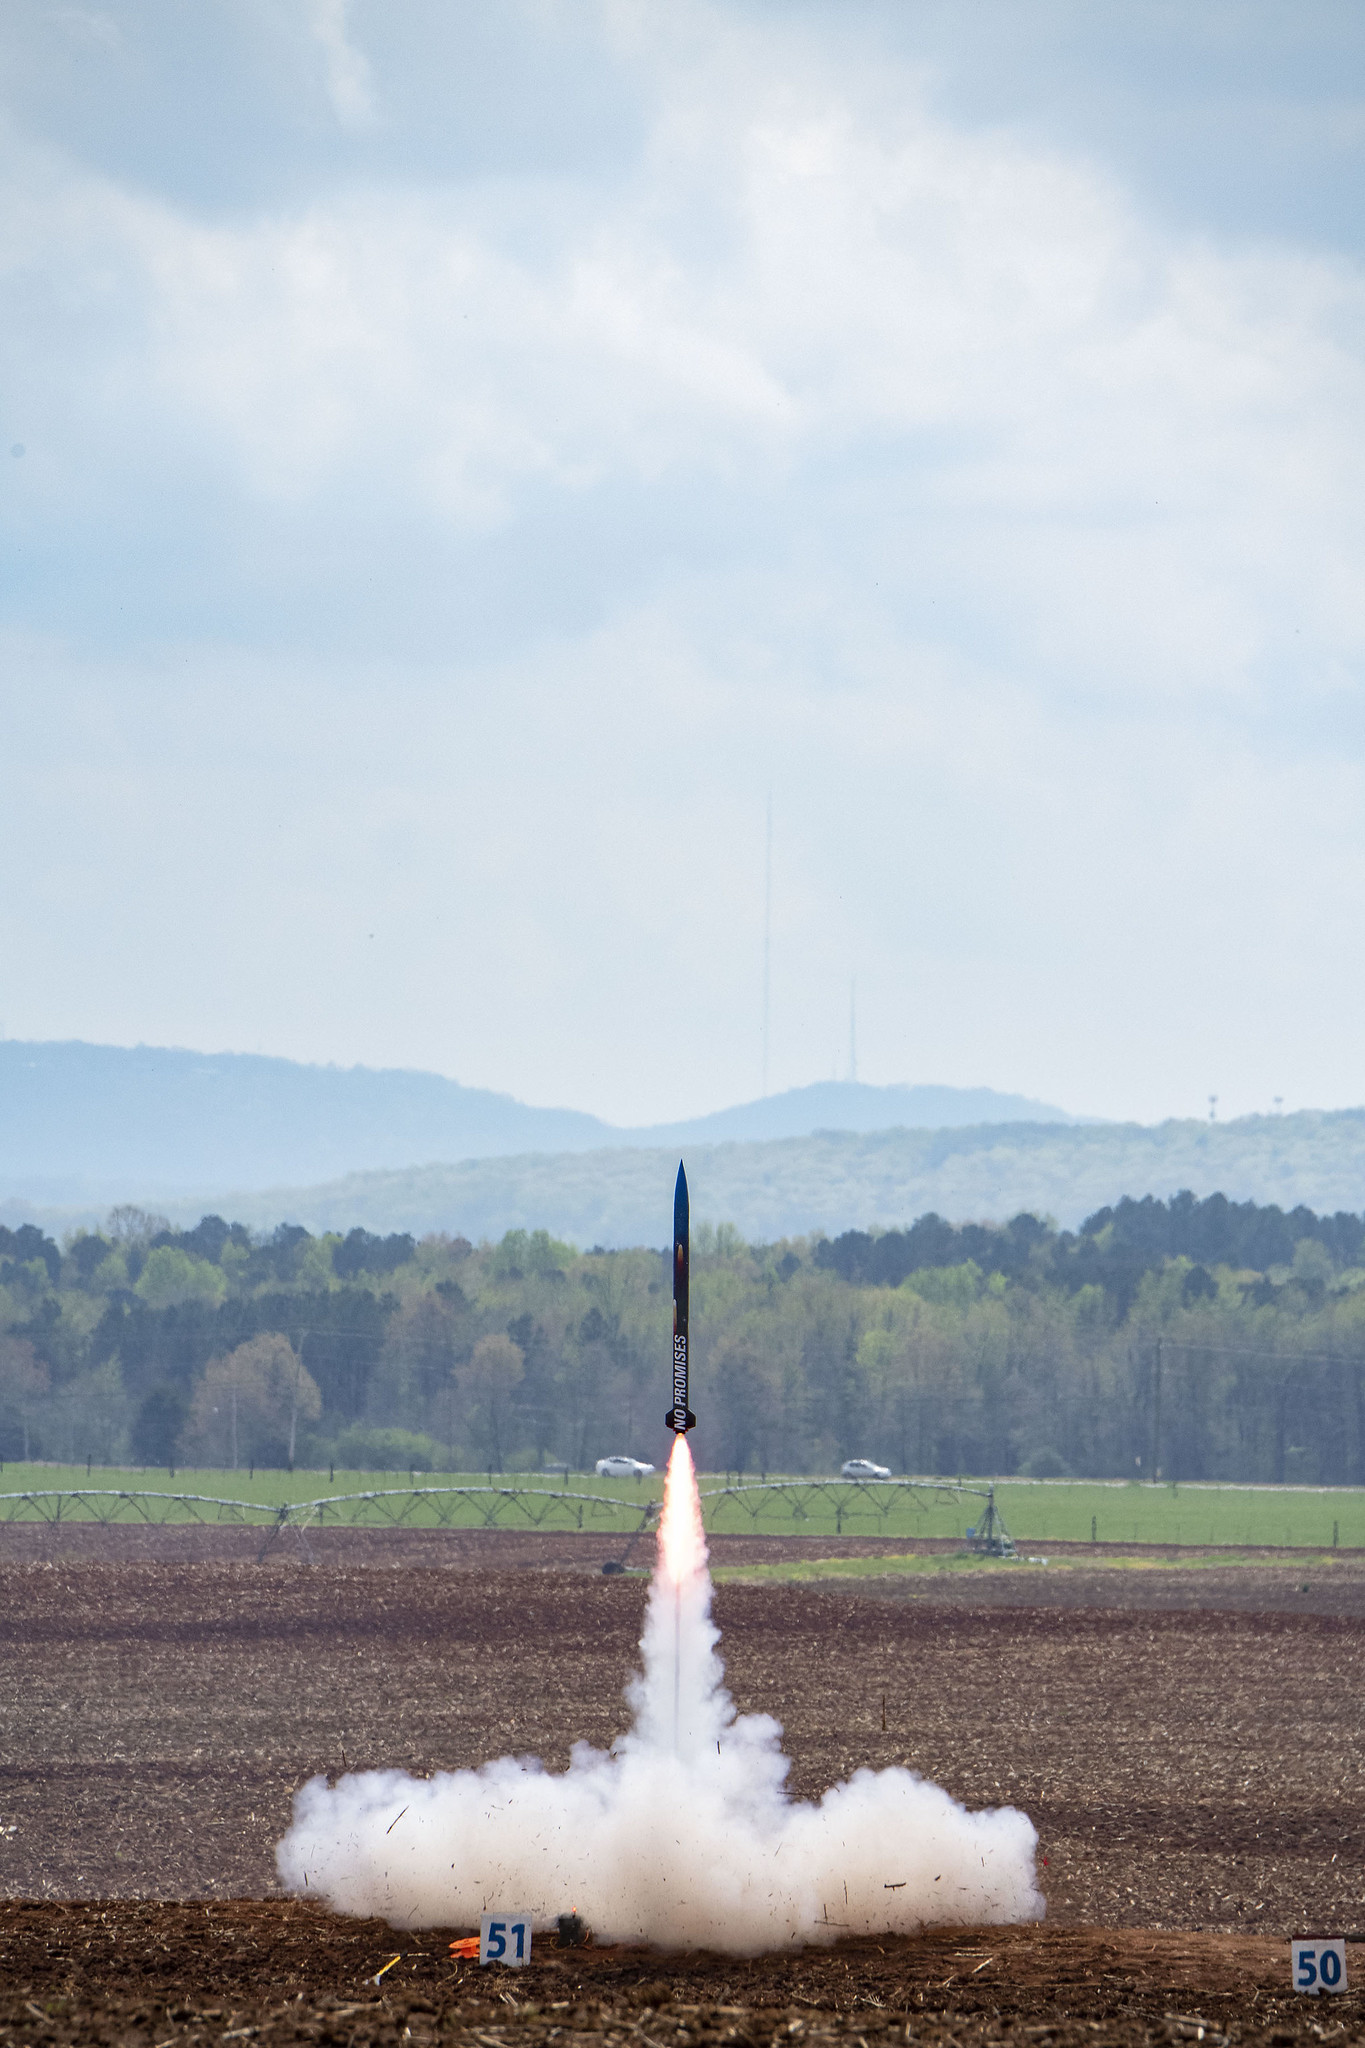 The rocket named No Promises from North Carolina State University in the 2019 competition roars off the launch pad.